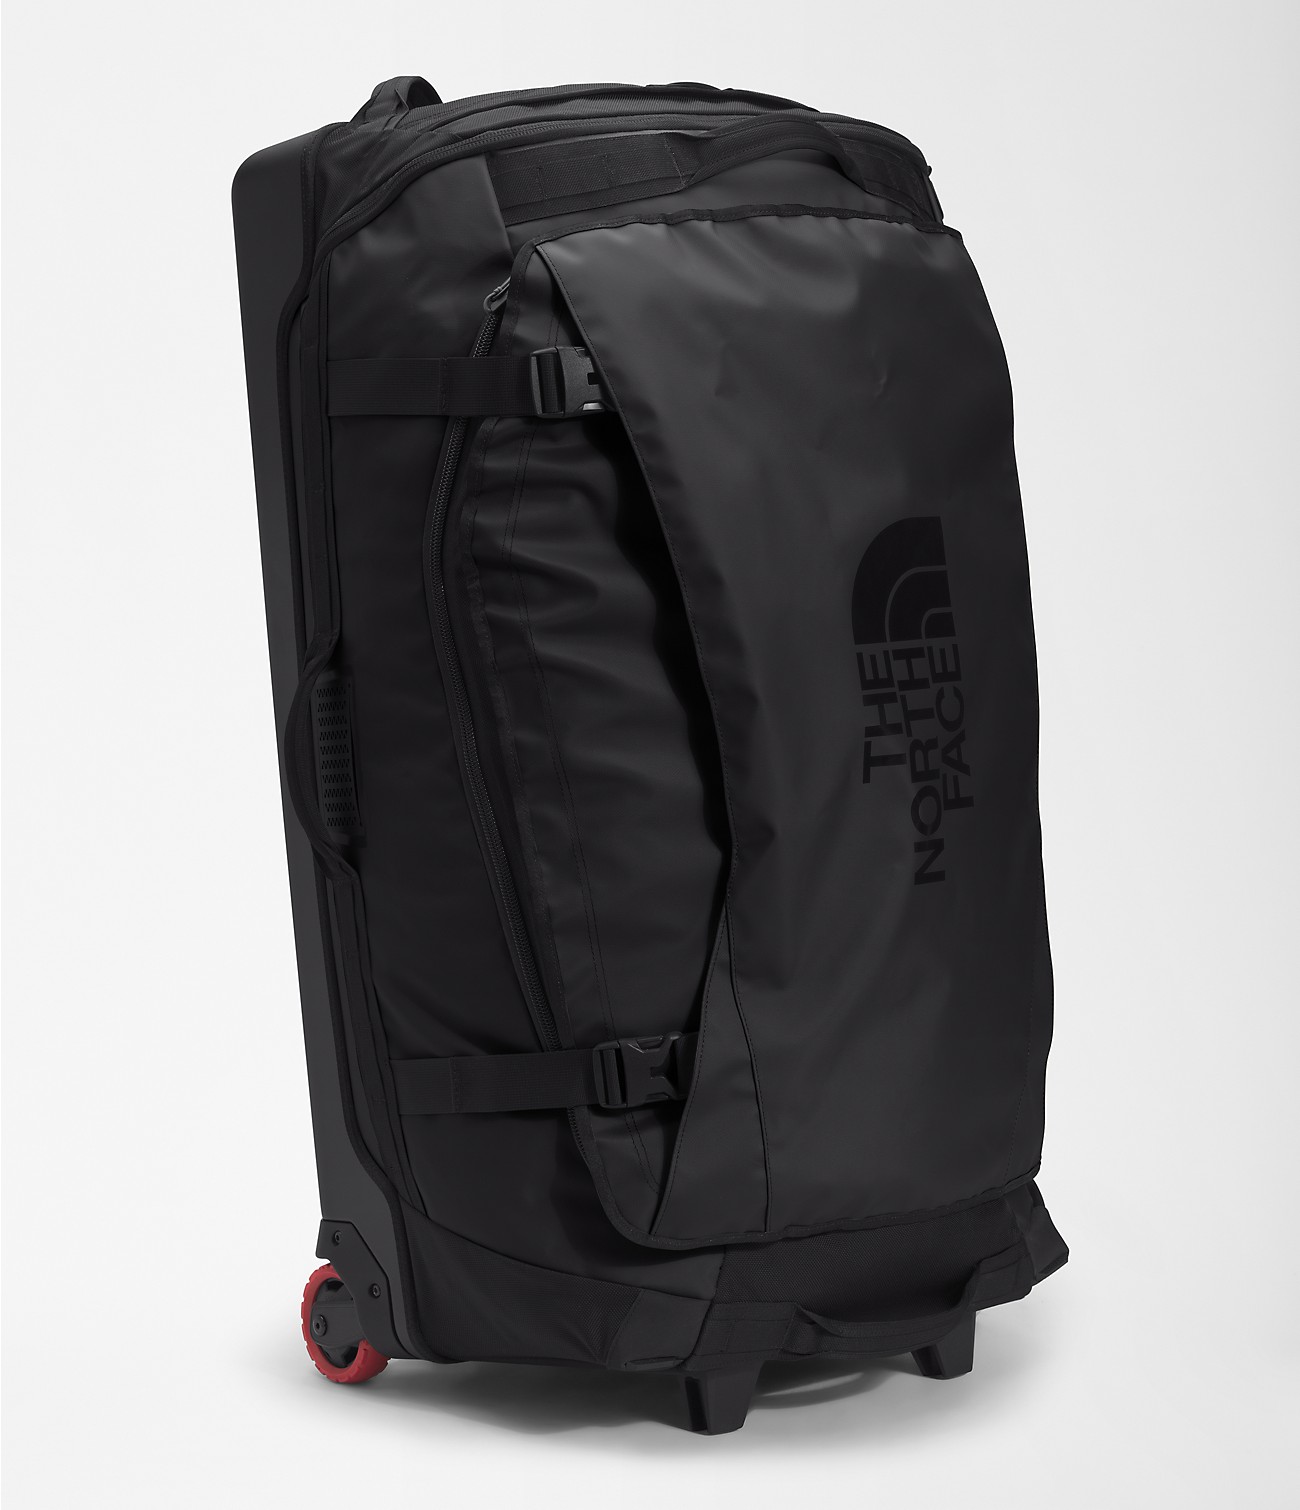 Unlock Wilderness' choice in the Deuter Vs North Face comparison, the Rolling Thunder—36'' by The North Face